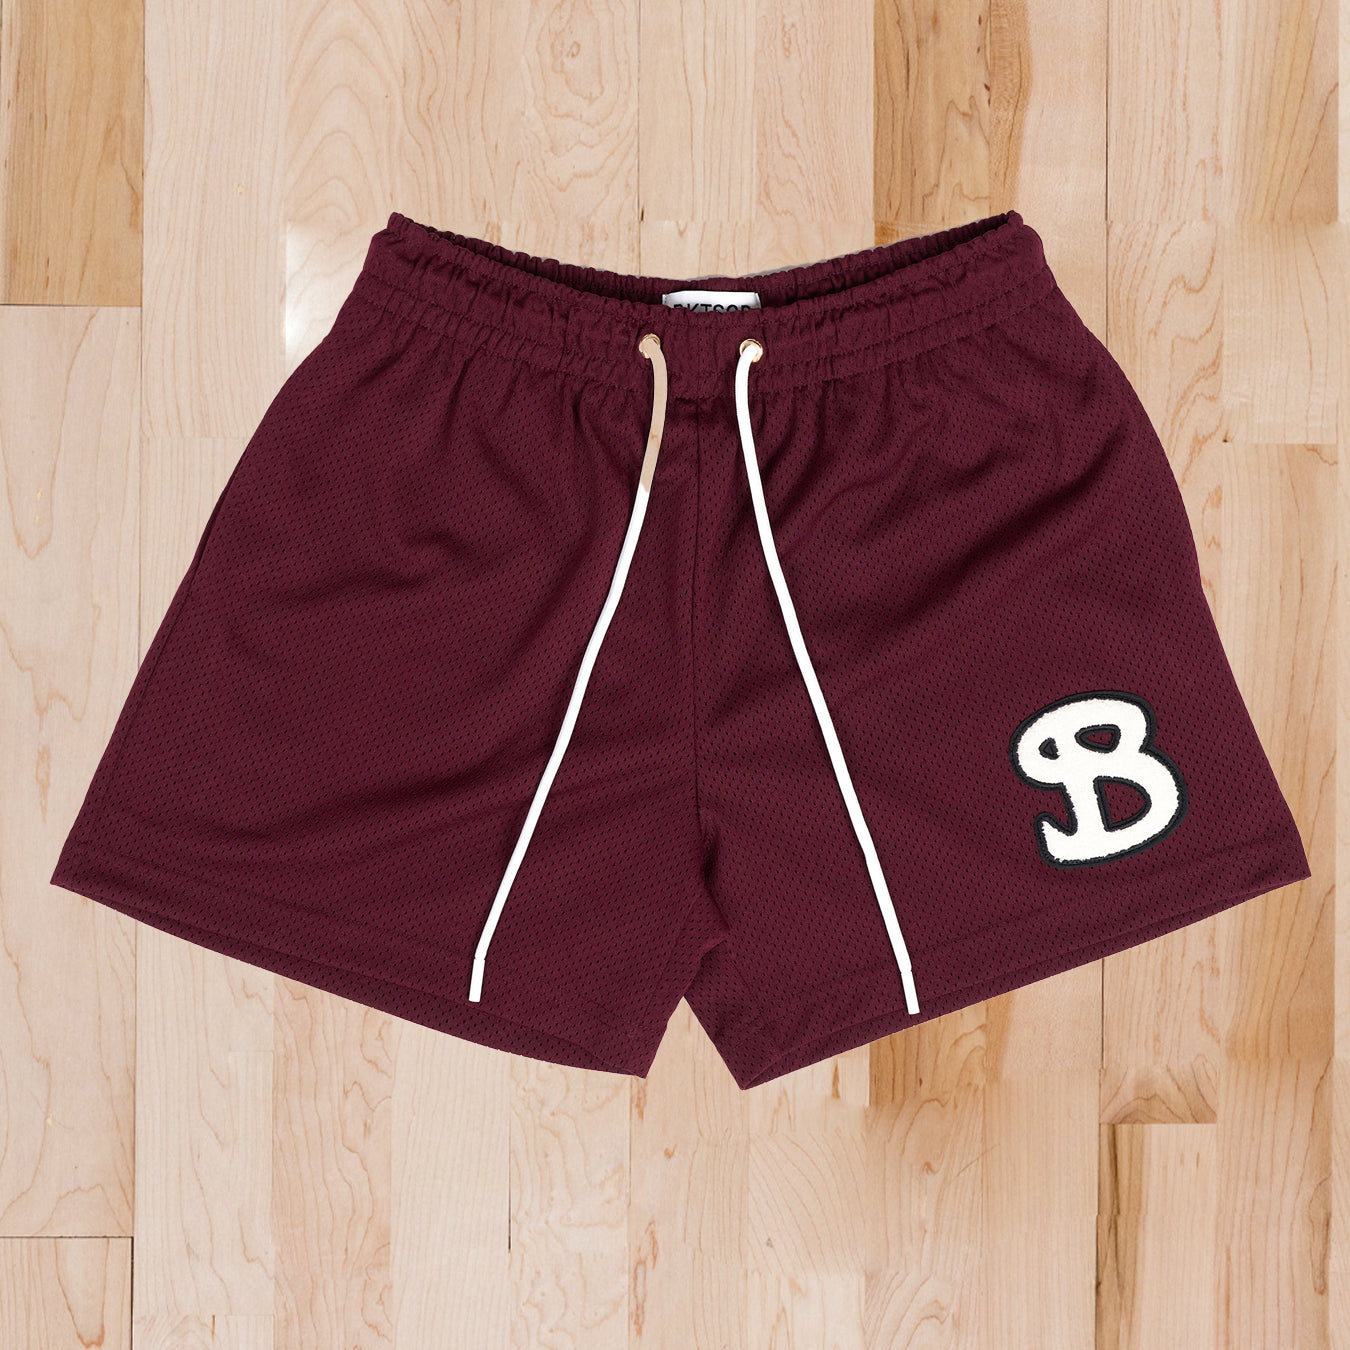 Classic Chenille Shorts Adult - Maroon